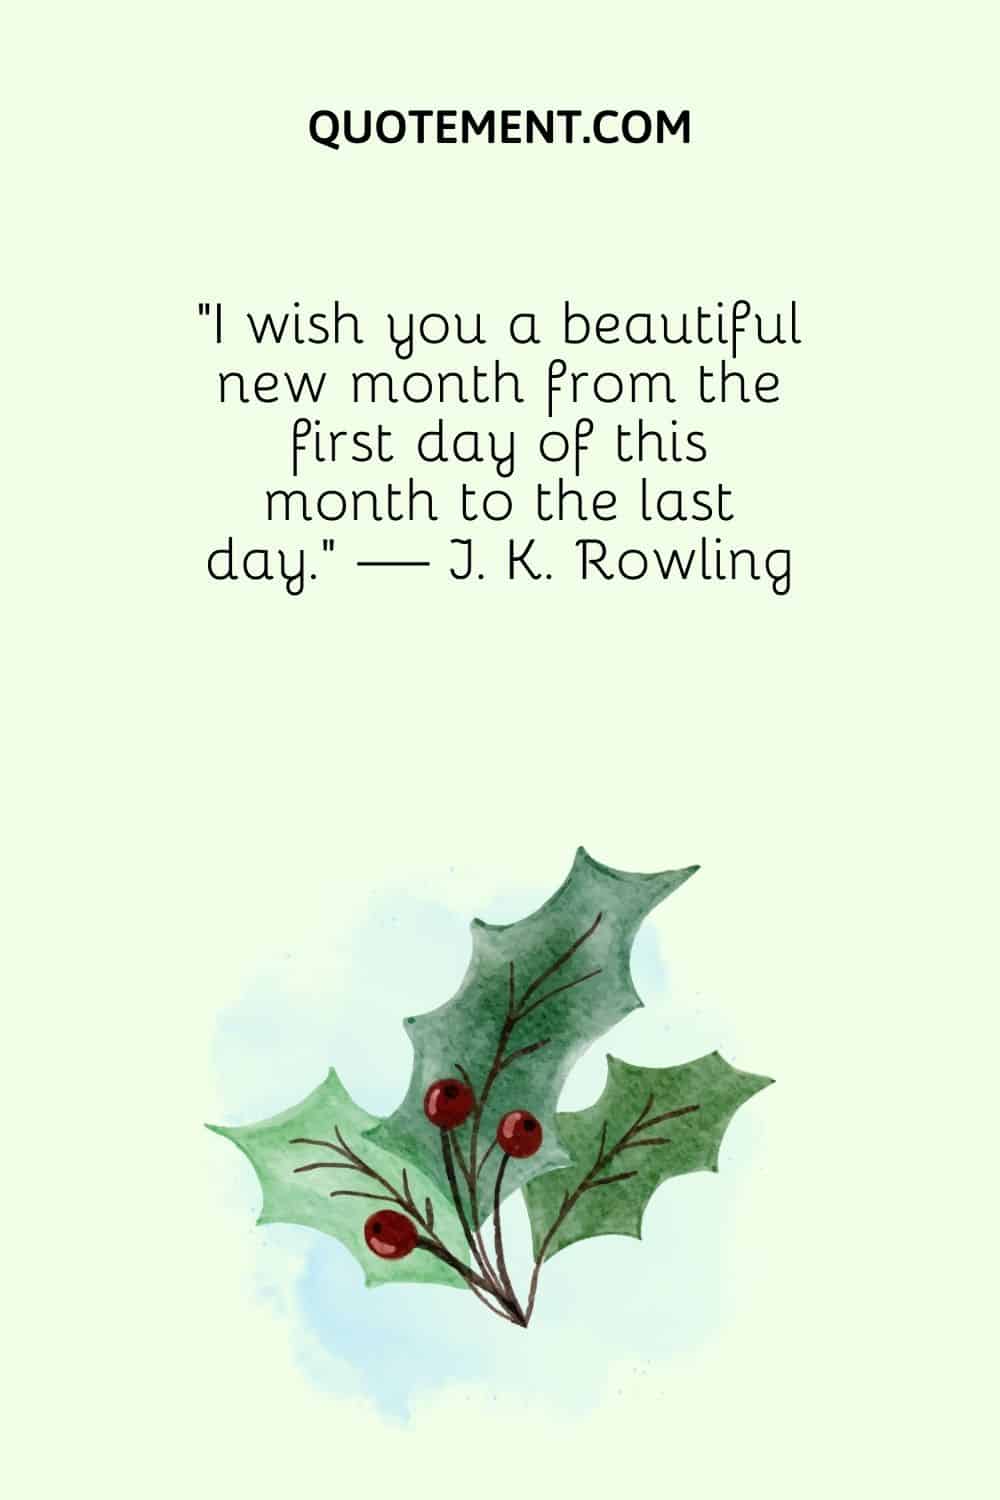 “I wish you a beautiful new month from the first day of this month to the last day.” — J. K. Rowling